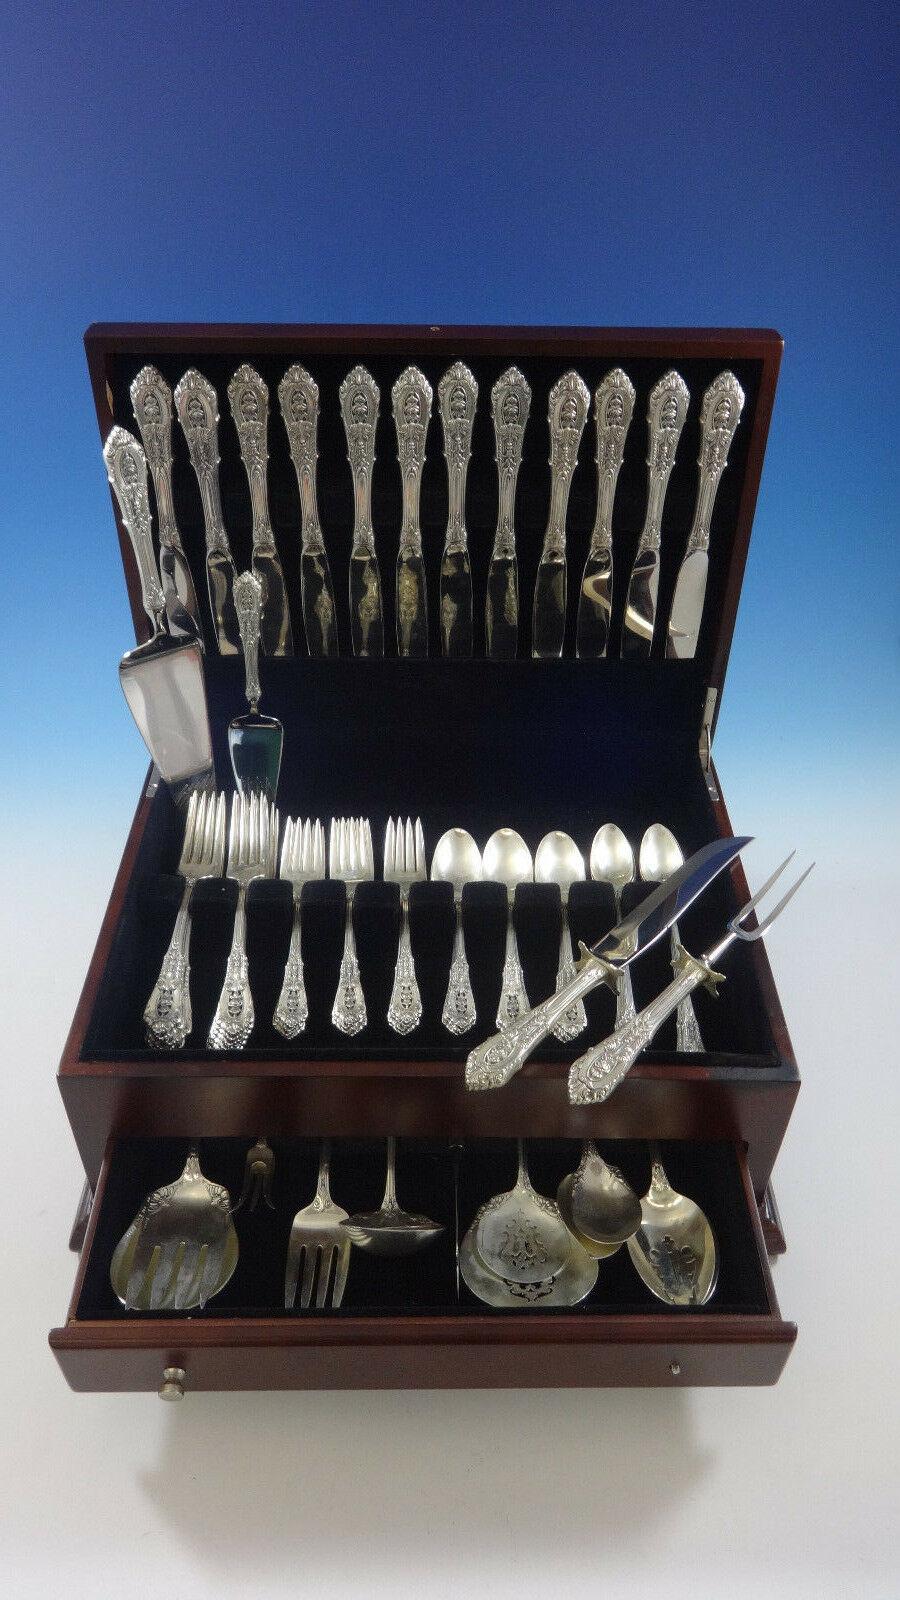 Rose Point by Wallace sterling silver dinner size flatware set, 78 pieces. This set includes:

12 dinner size knives, 9 7/8